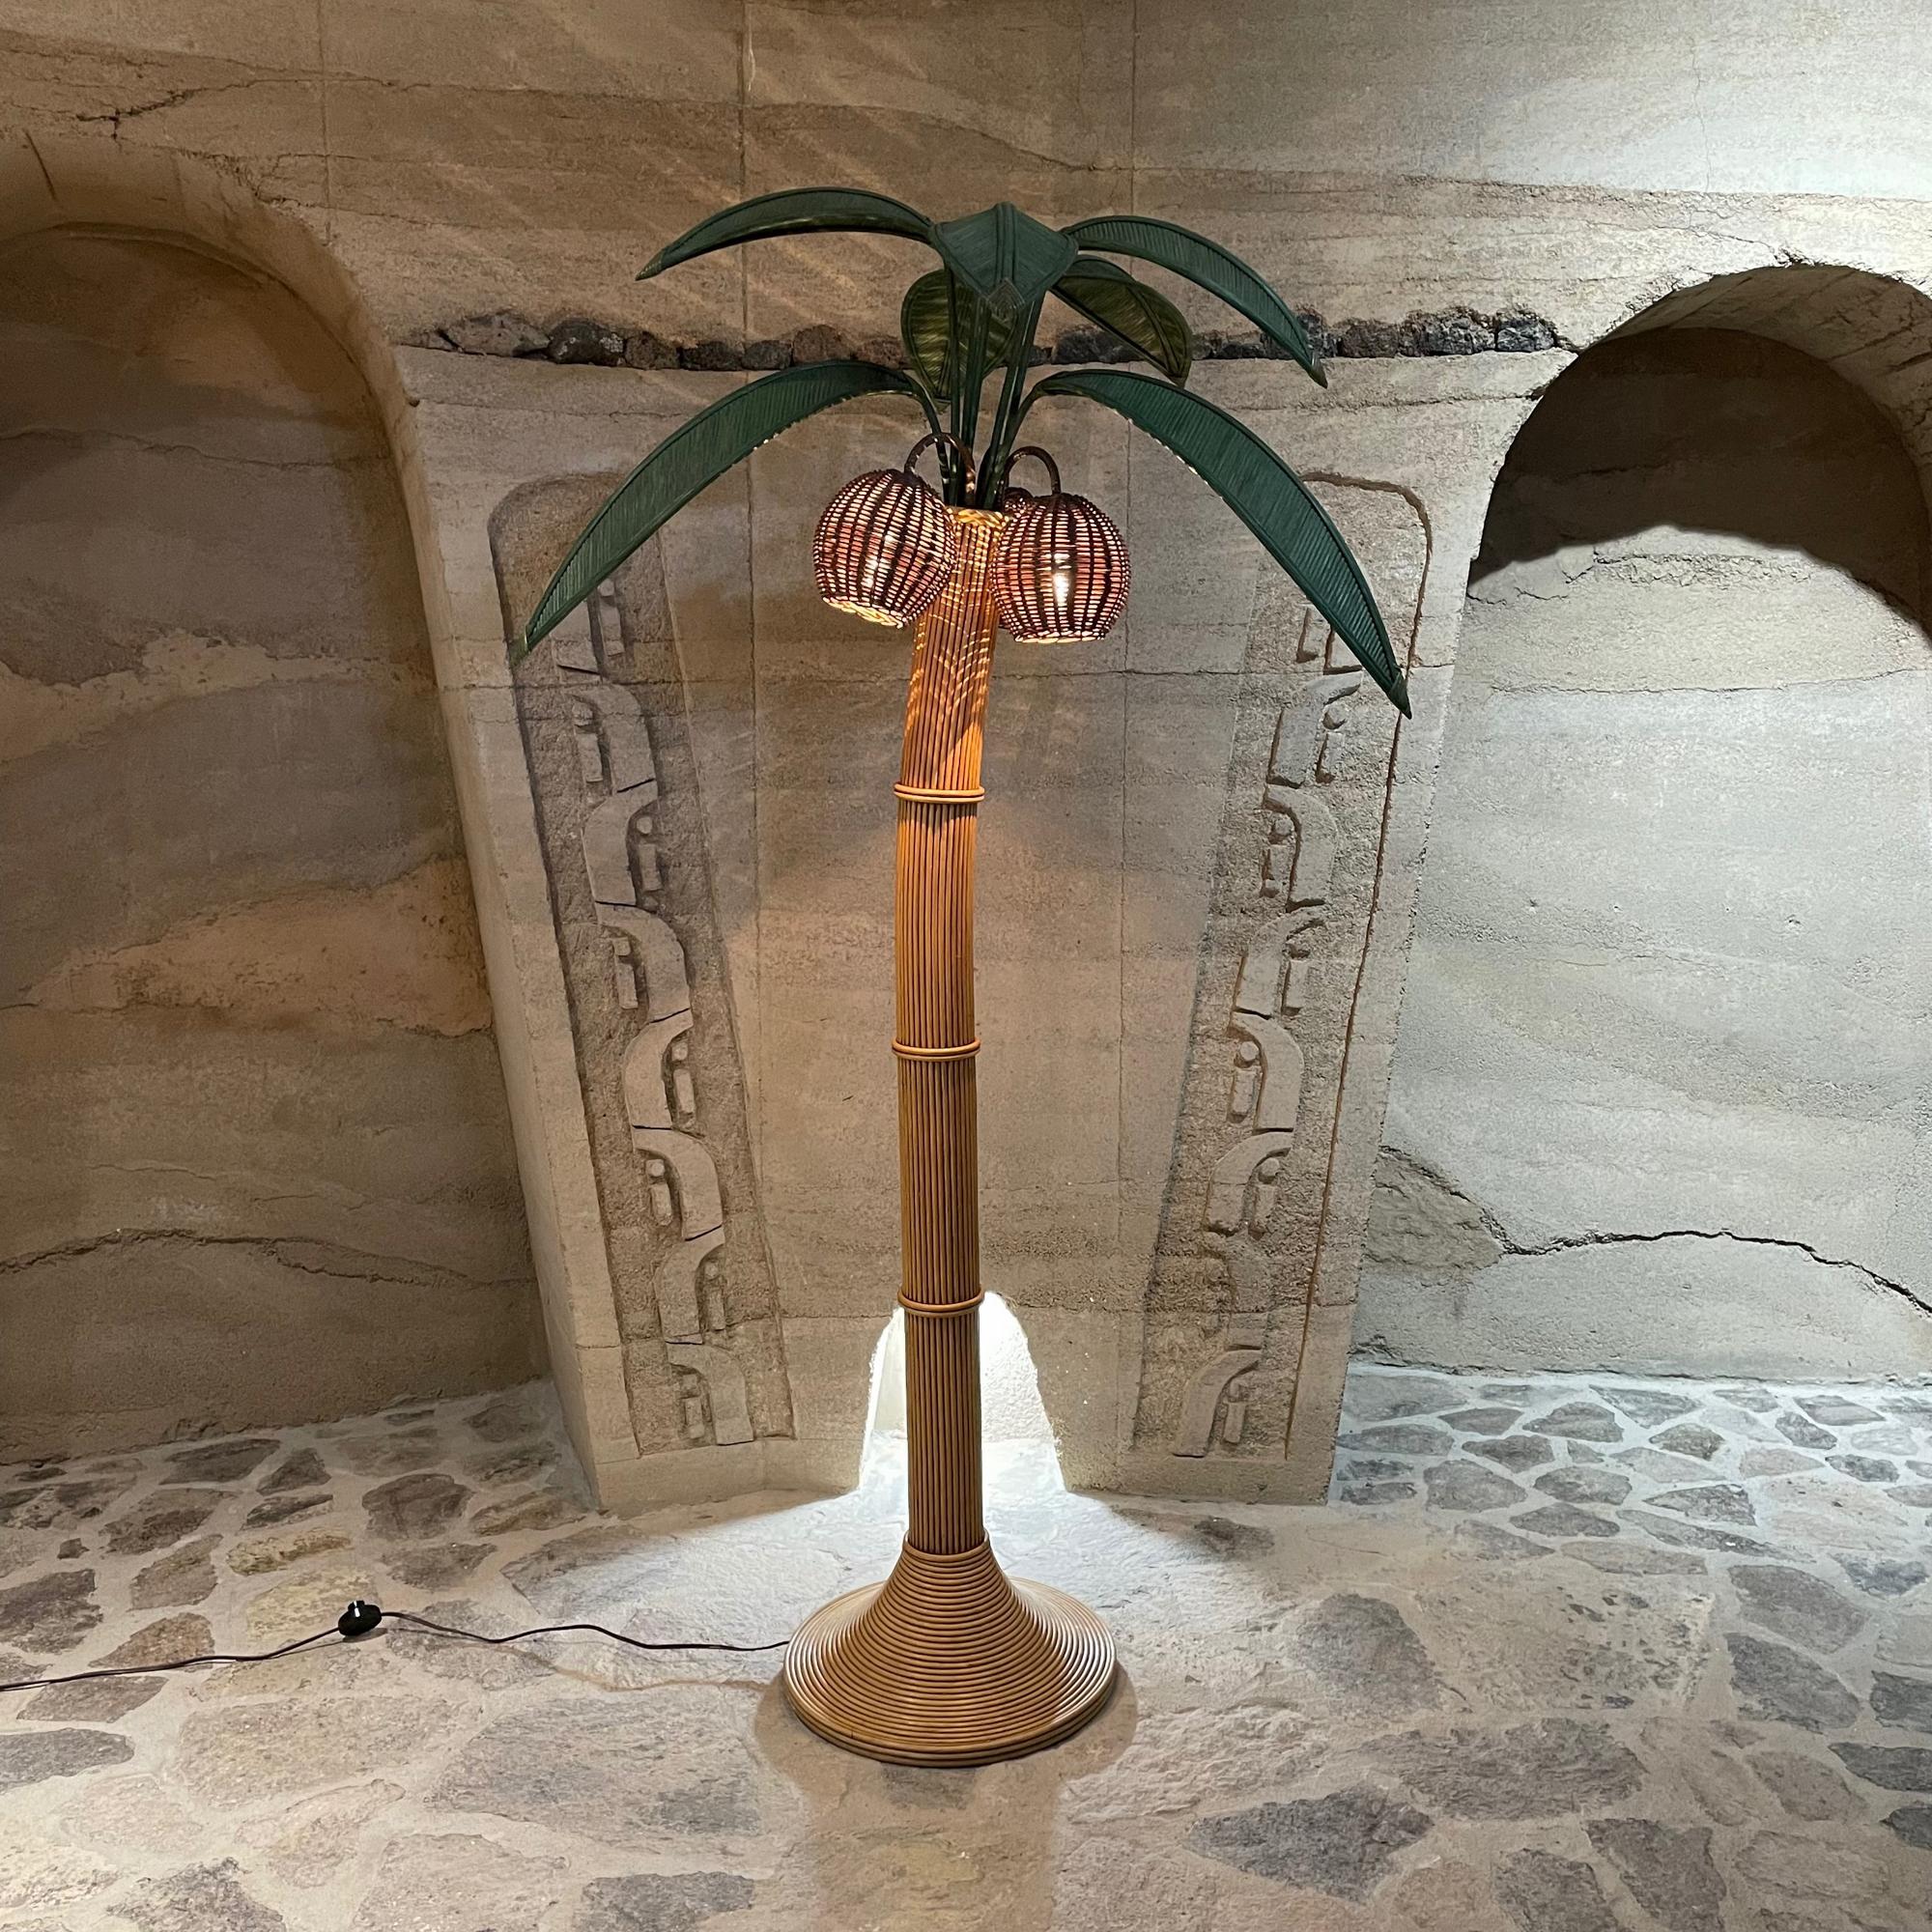 Floor Lamp
1970s Vintage Stunning Exotic and Majestic Tall Palm Tree Floor Lamp in handmade rattan and wicker with dyed green wicker branches.
In the style of designer and Mexican folk artist, Mario Lopez Torres. Unmarked.
Evokes tropical delight in